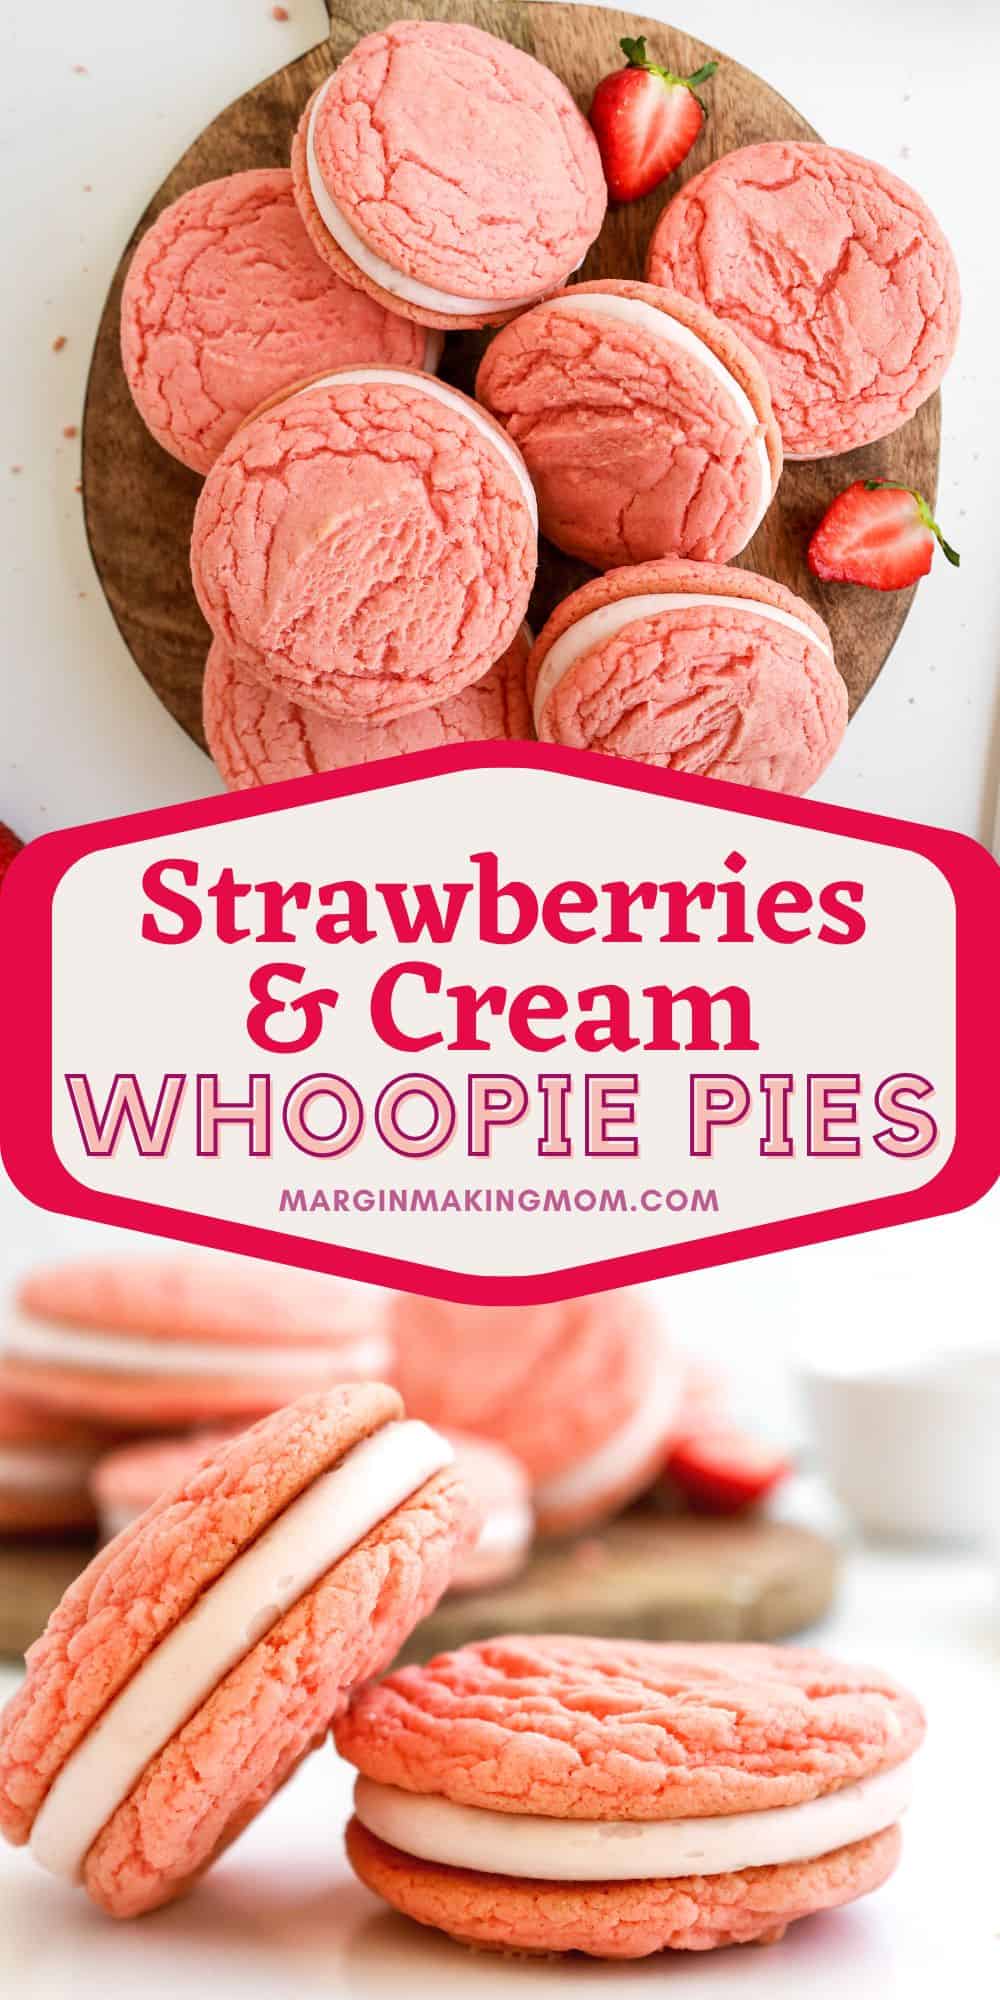 two photos; one shows several strawberry sandwich cookies on a wooden platter; the other shows strawberry whoopie pies stacked together